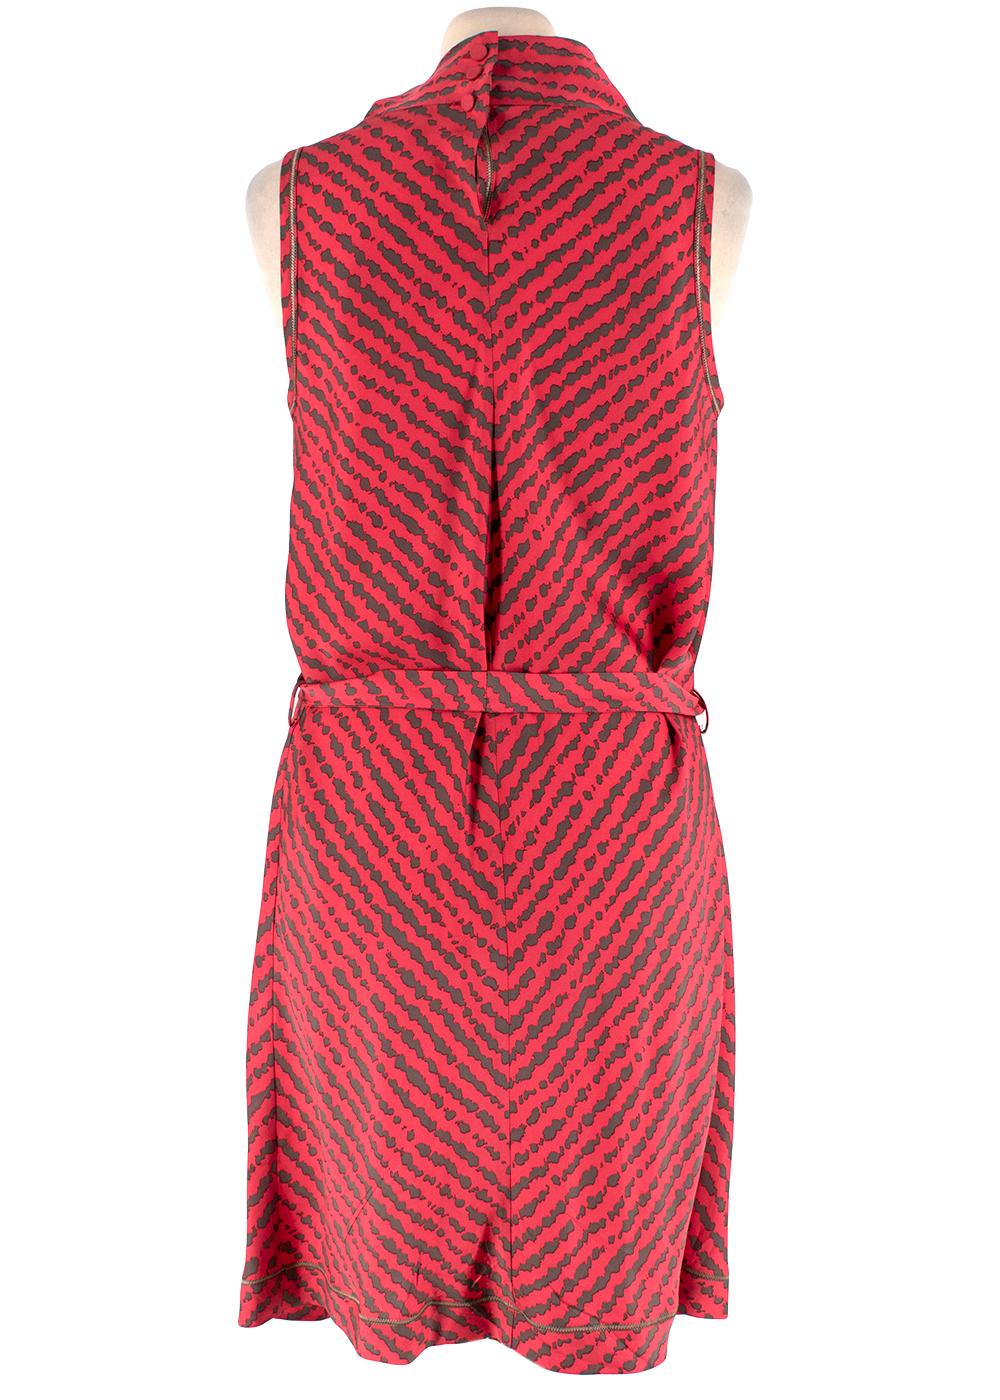 Missoni Hot Pink Printed Silk Sleeveless Midi Shift Dress - Size S In Excellent Condition For Sale In London, GB